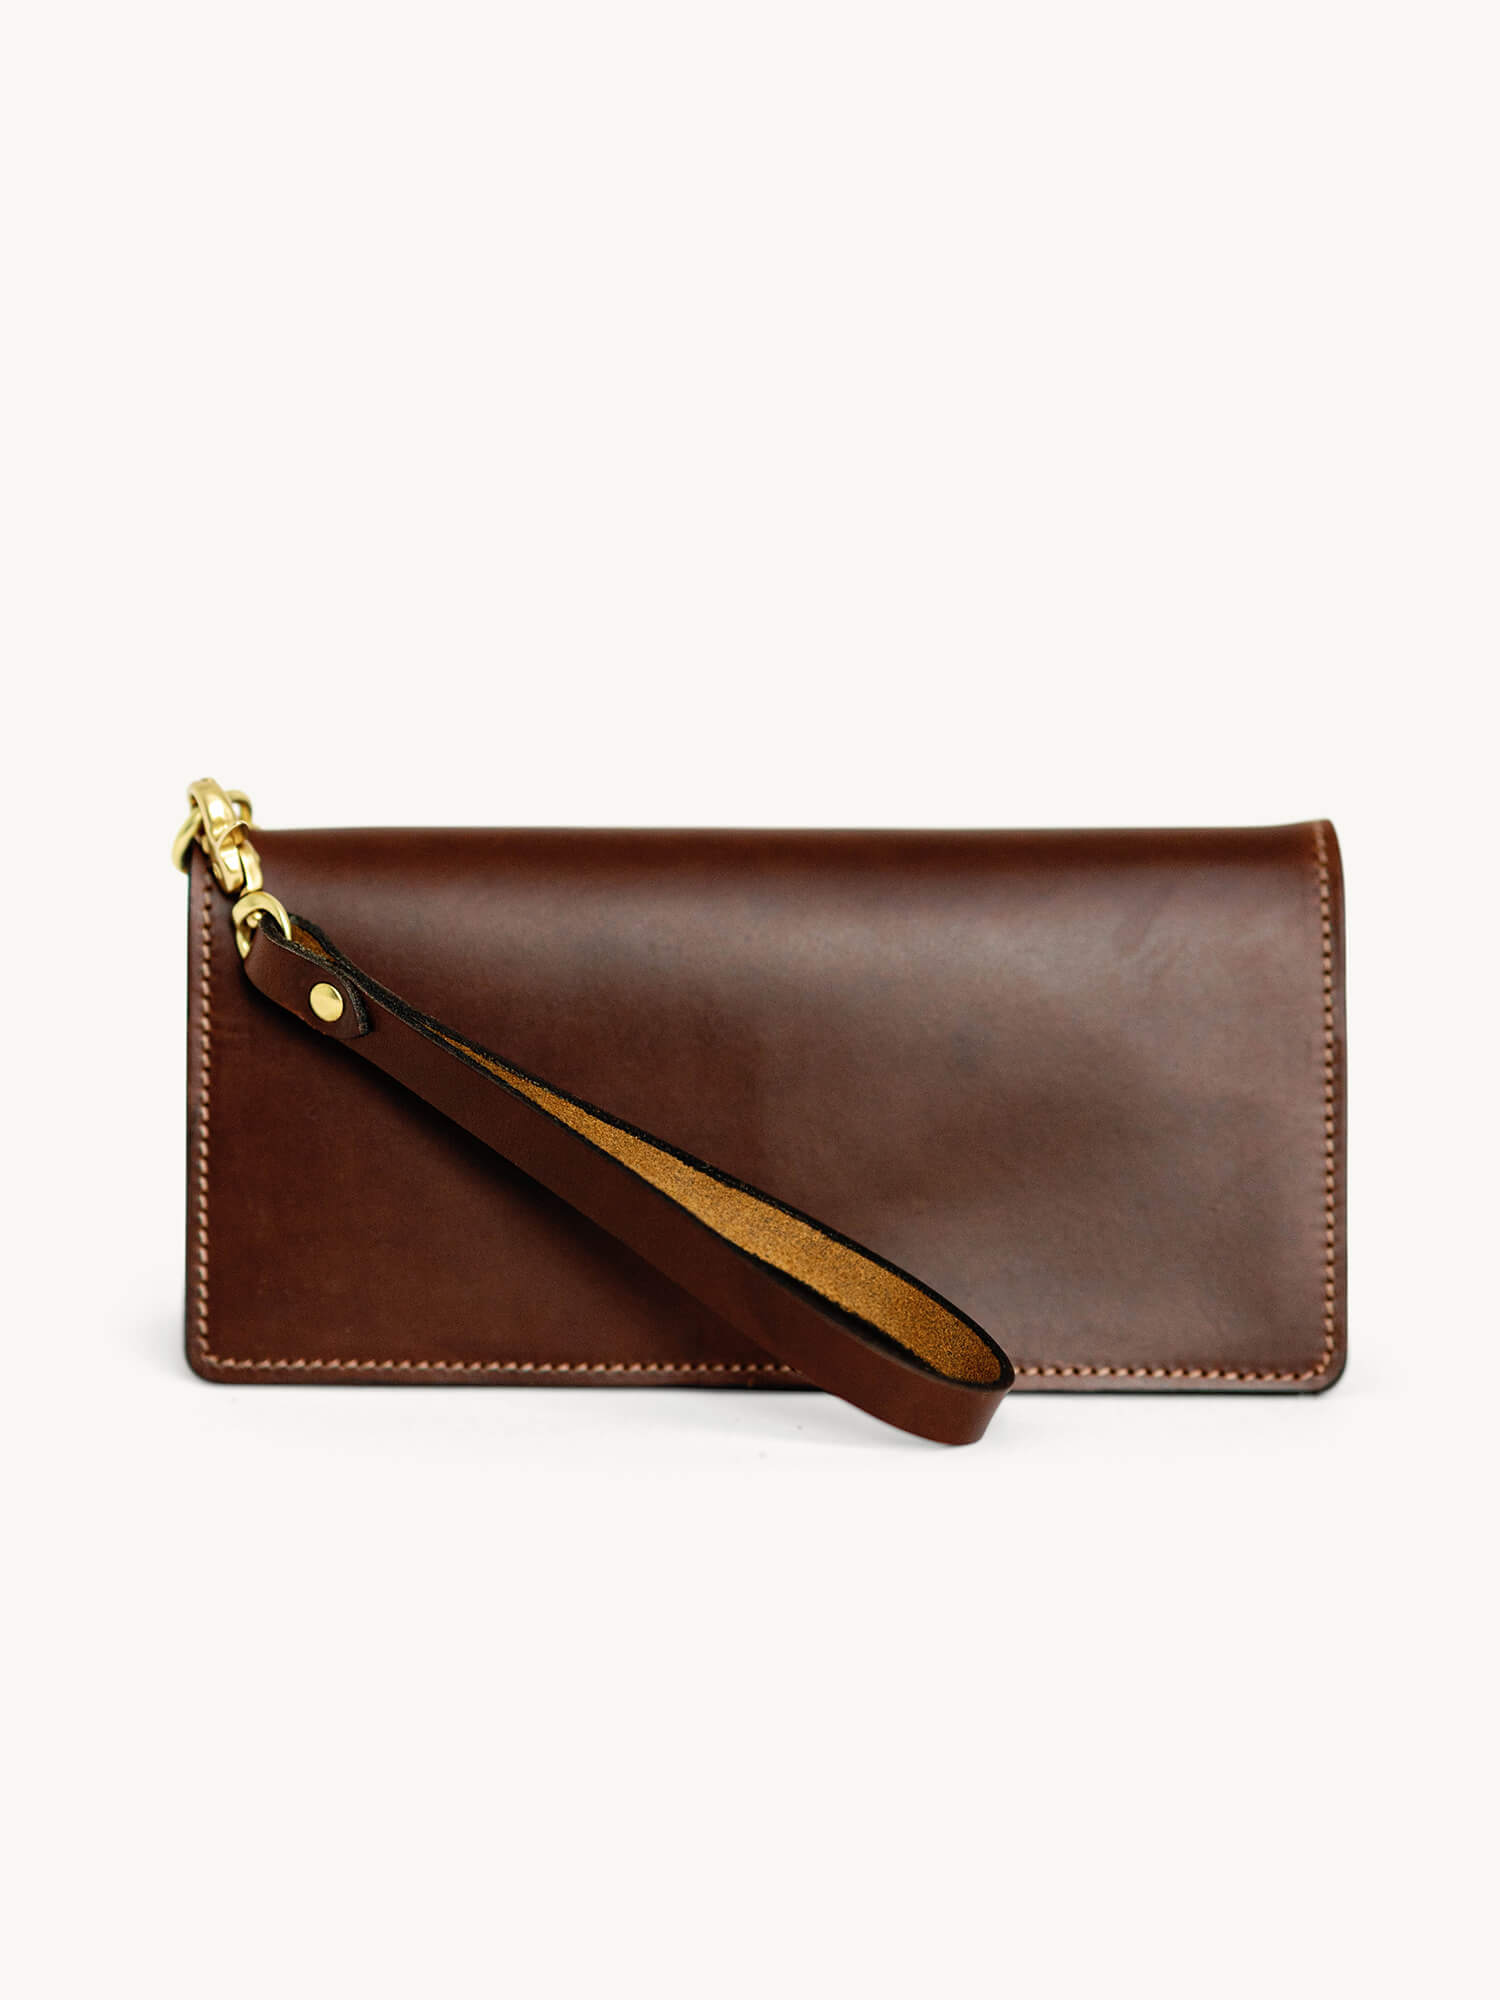 Women's Leather Wallet Made With Genuine Leather by Moonster – Moonster  Leather Products